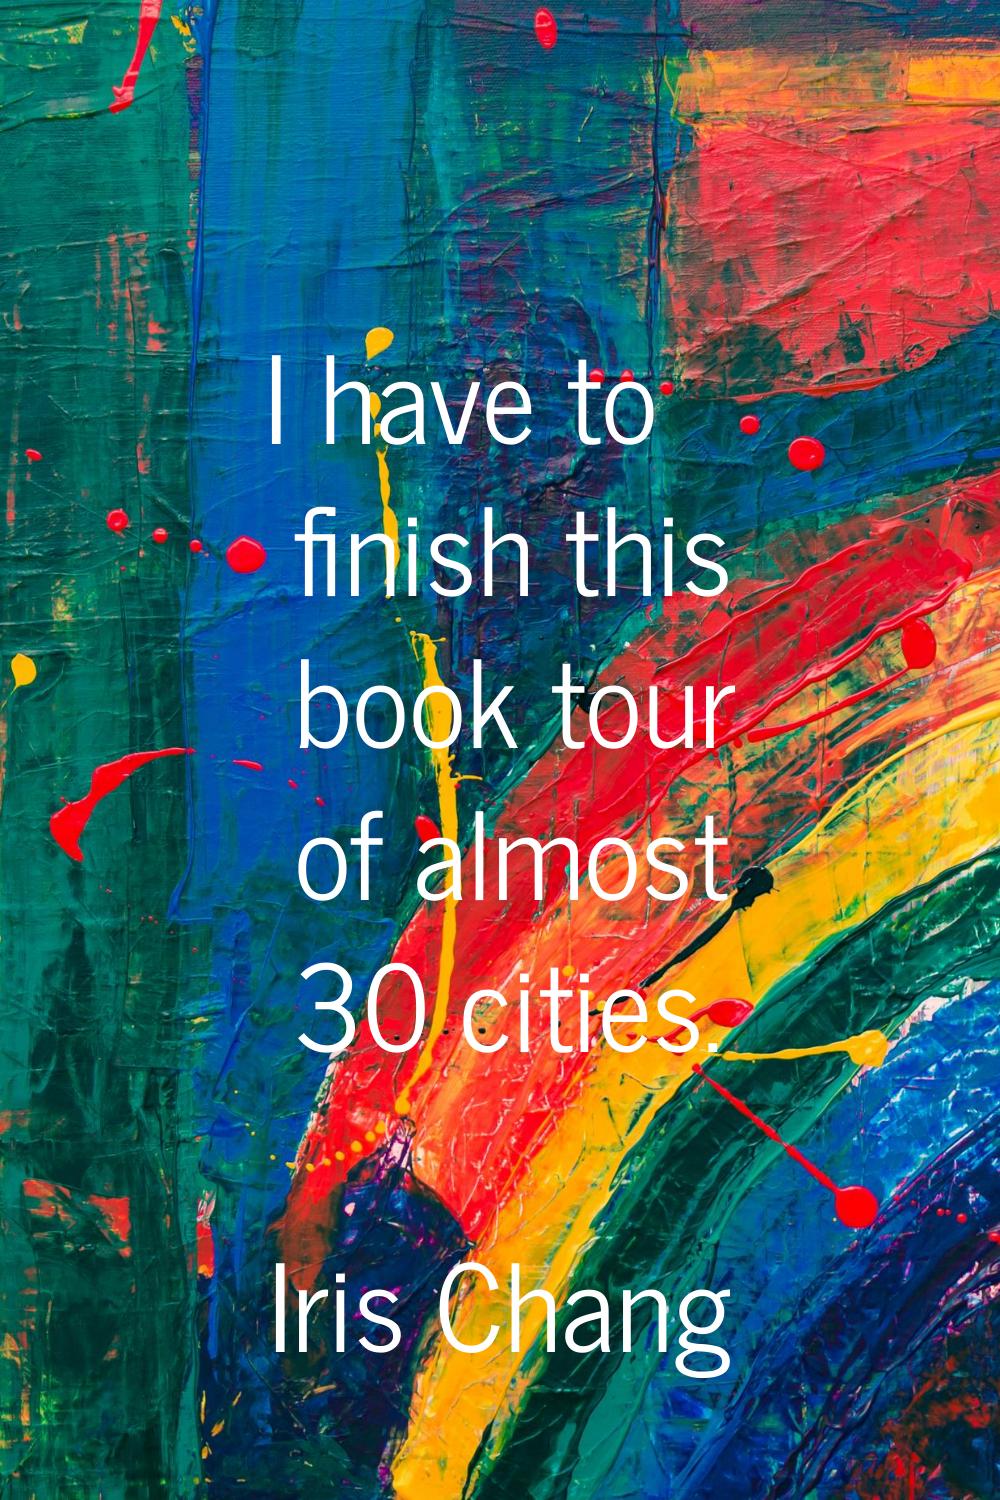 I have to finish this book tour of almost 30 cities.